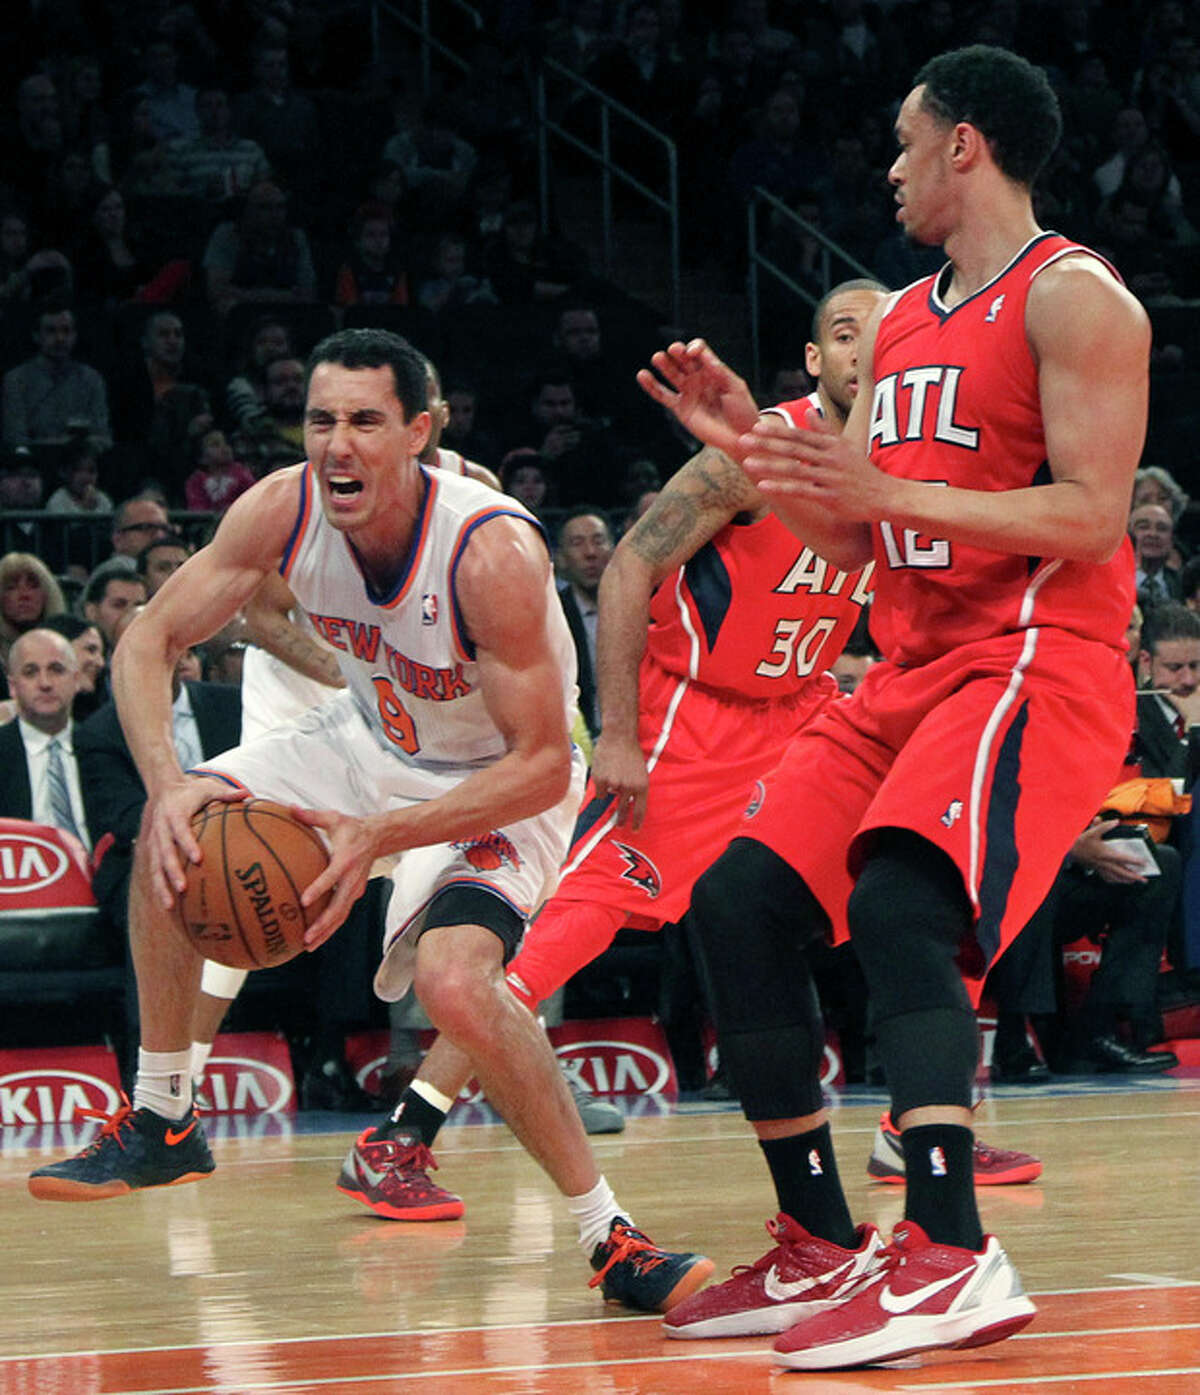 New York Knicks' Pablo Prigioni (9) grimaces as he injures his foot driving past Dahntay Jones (30) and Atlanta Hawks' John Jenkins during the first half of an NBA basketball game, Wednesday, April 17, 2013, at Madison Square Garden in New York. (AP Photo/Mary Altaffer)